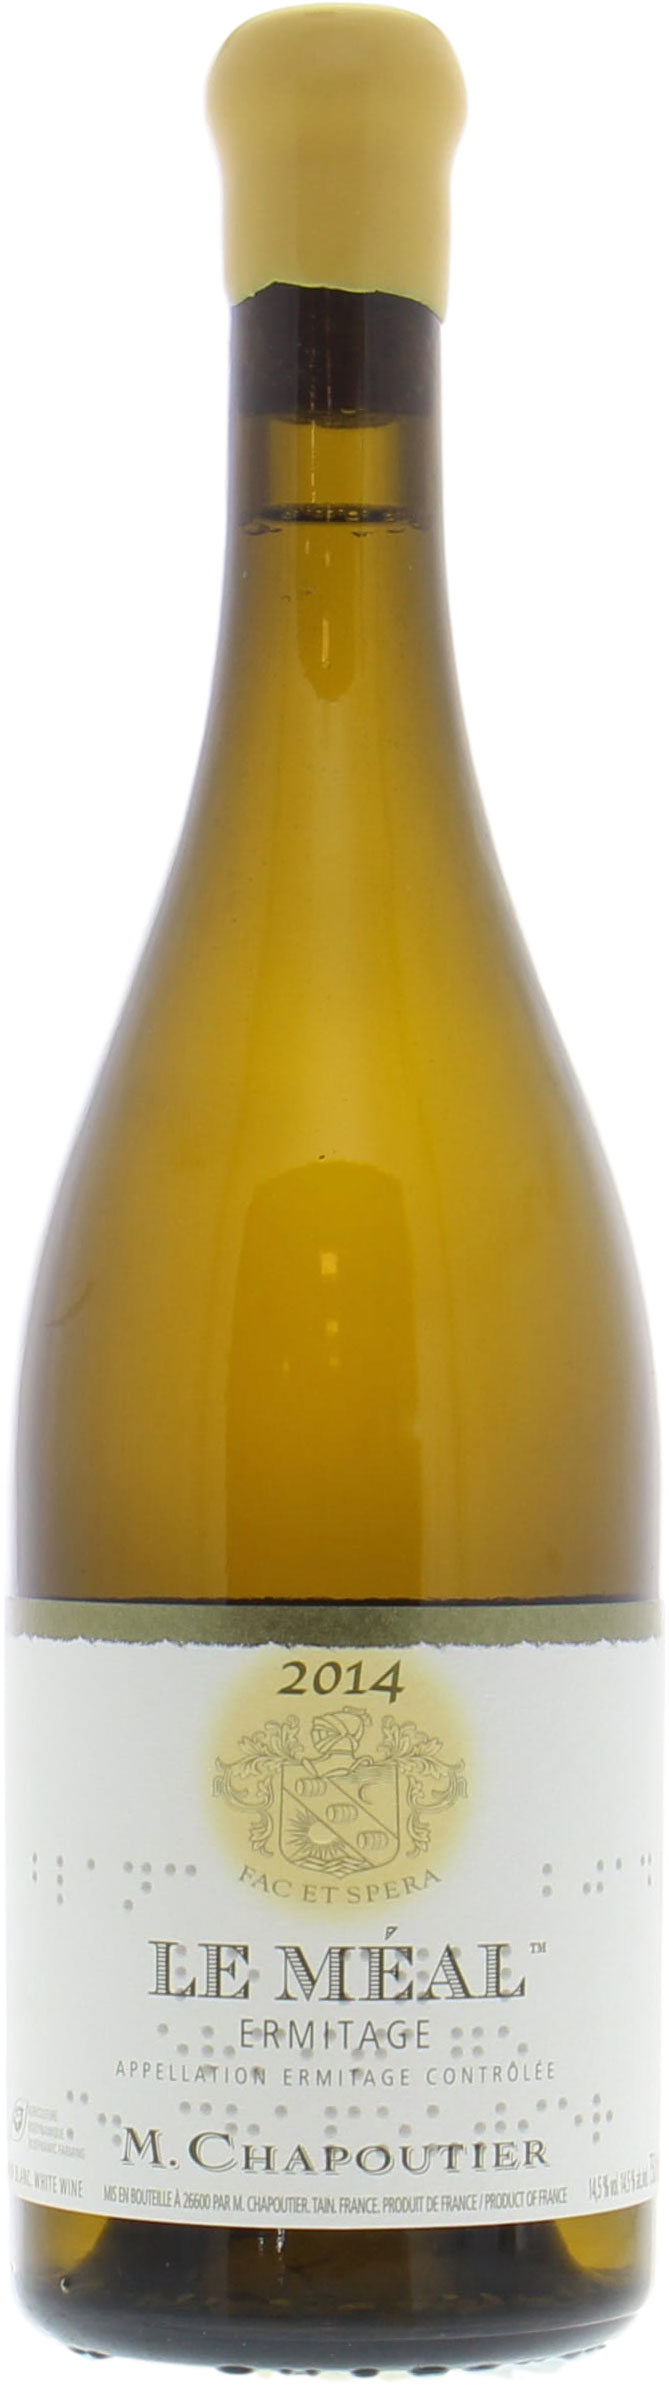 Chapoutier - Ermitage Le Meal Blanc 2014 Perfect